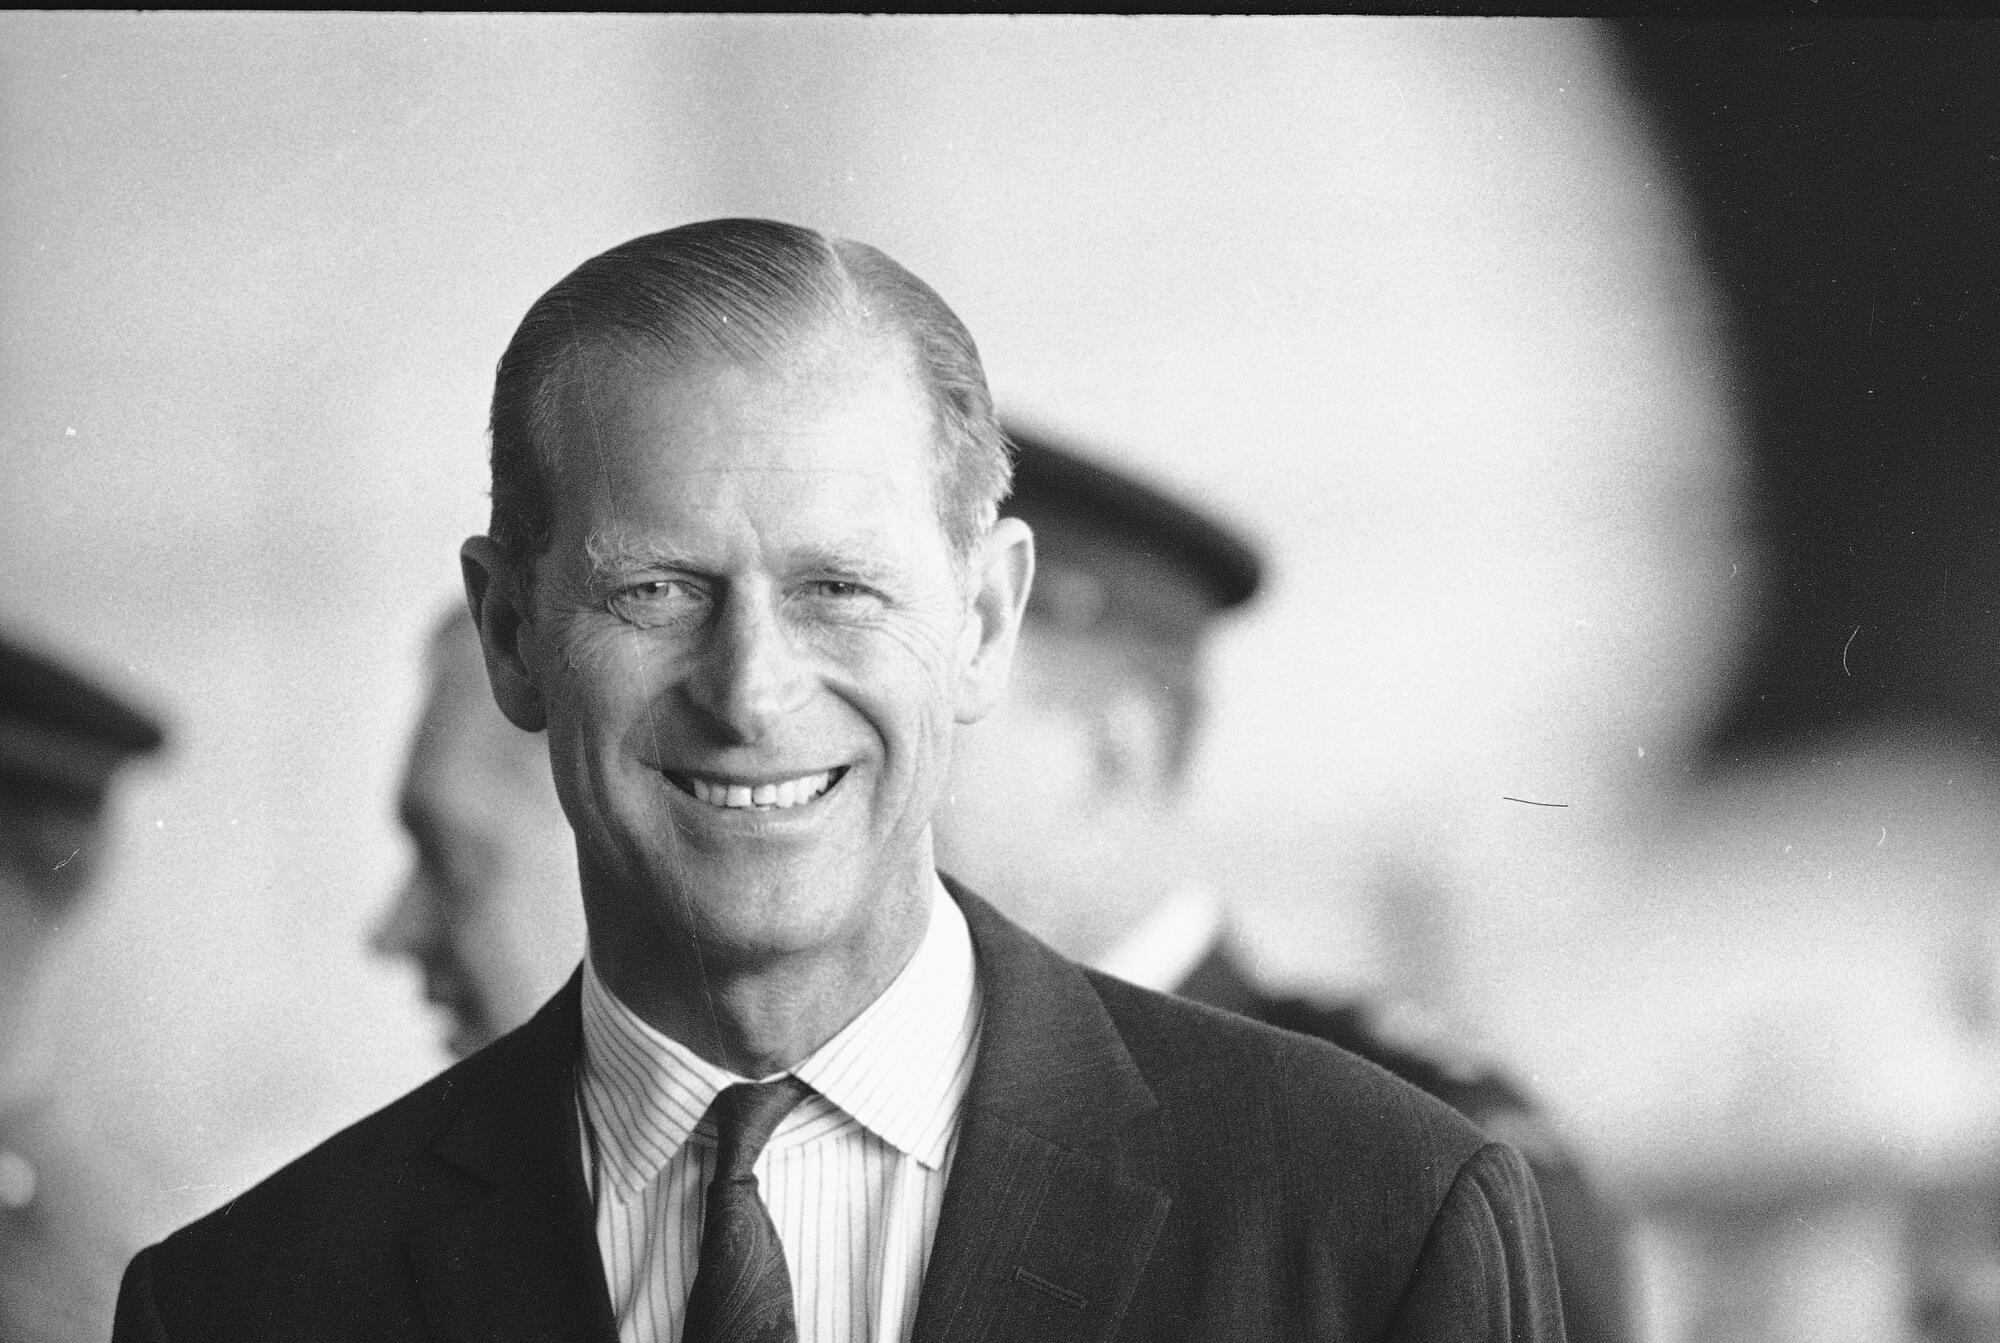 A 1967 portrait of a smiling Prince Philip